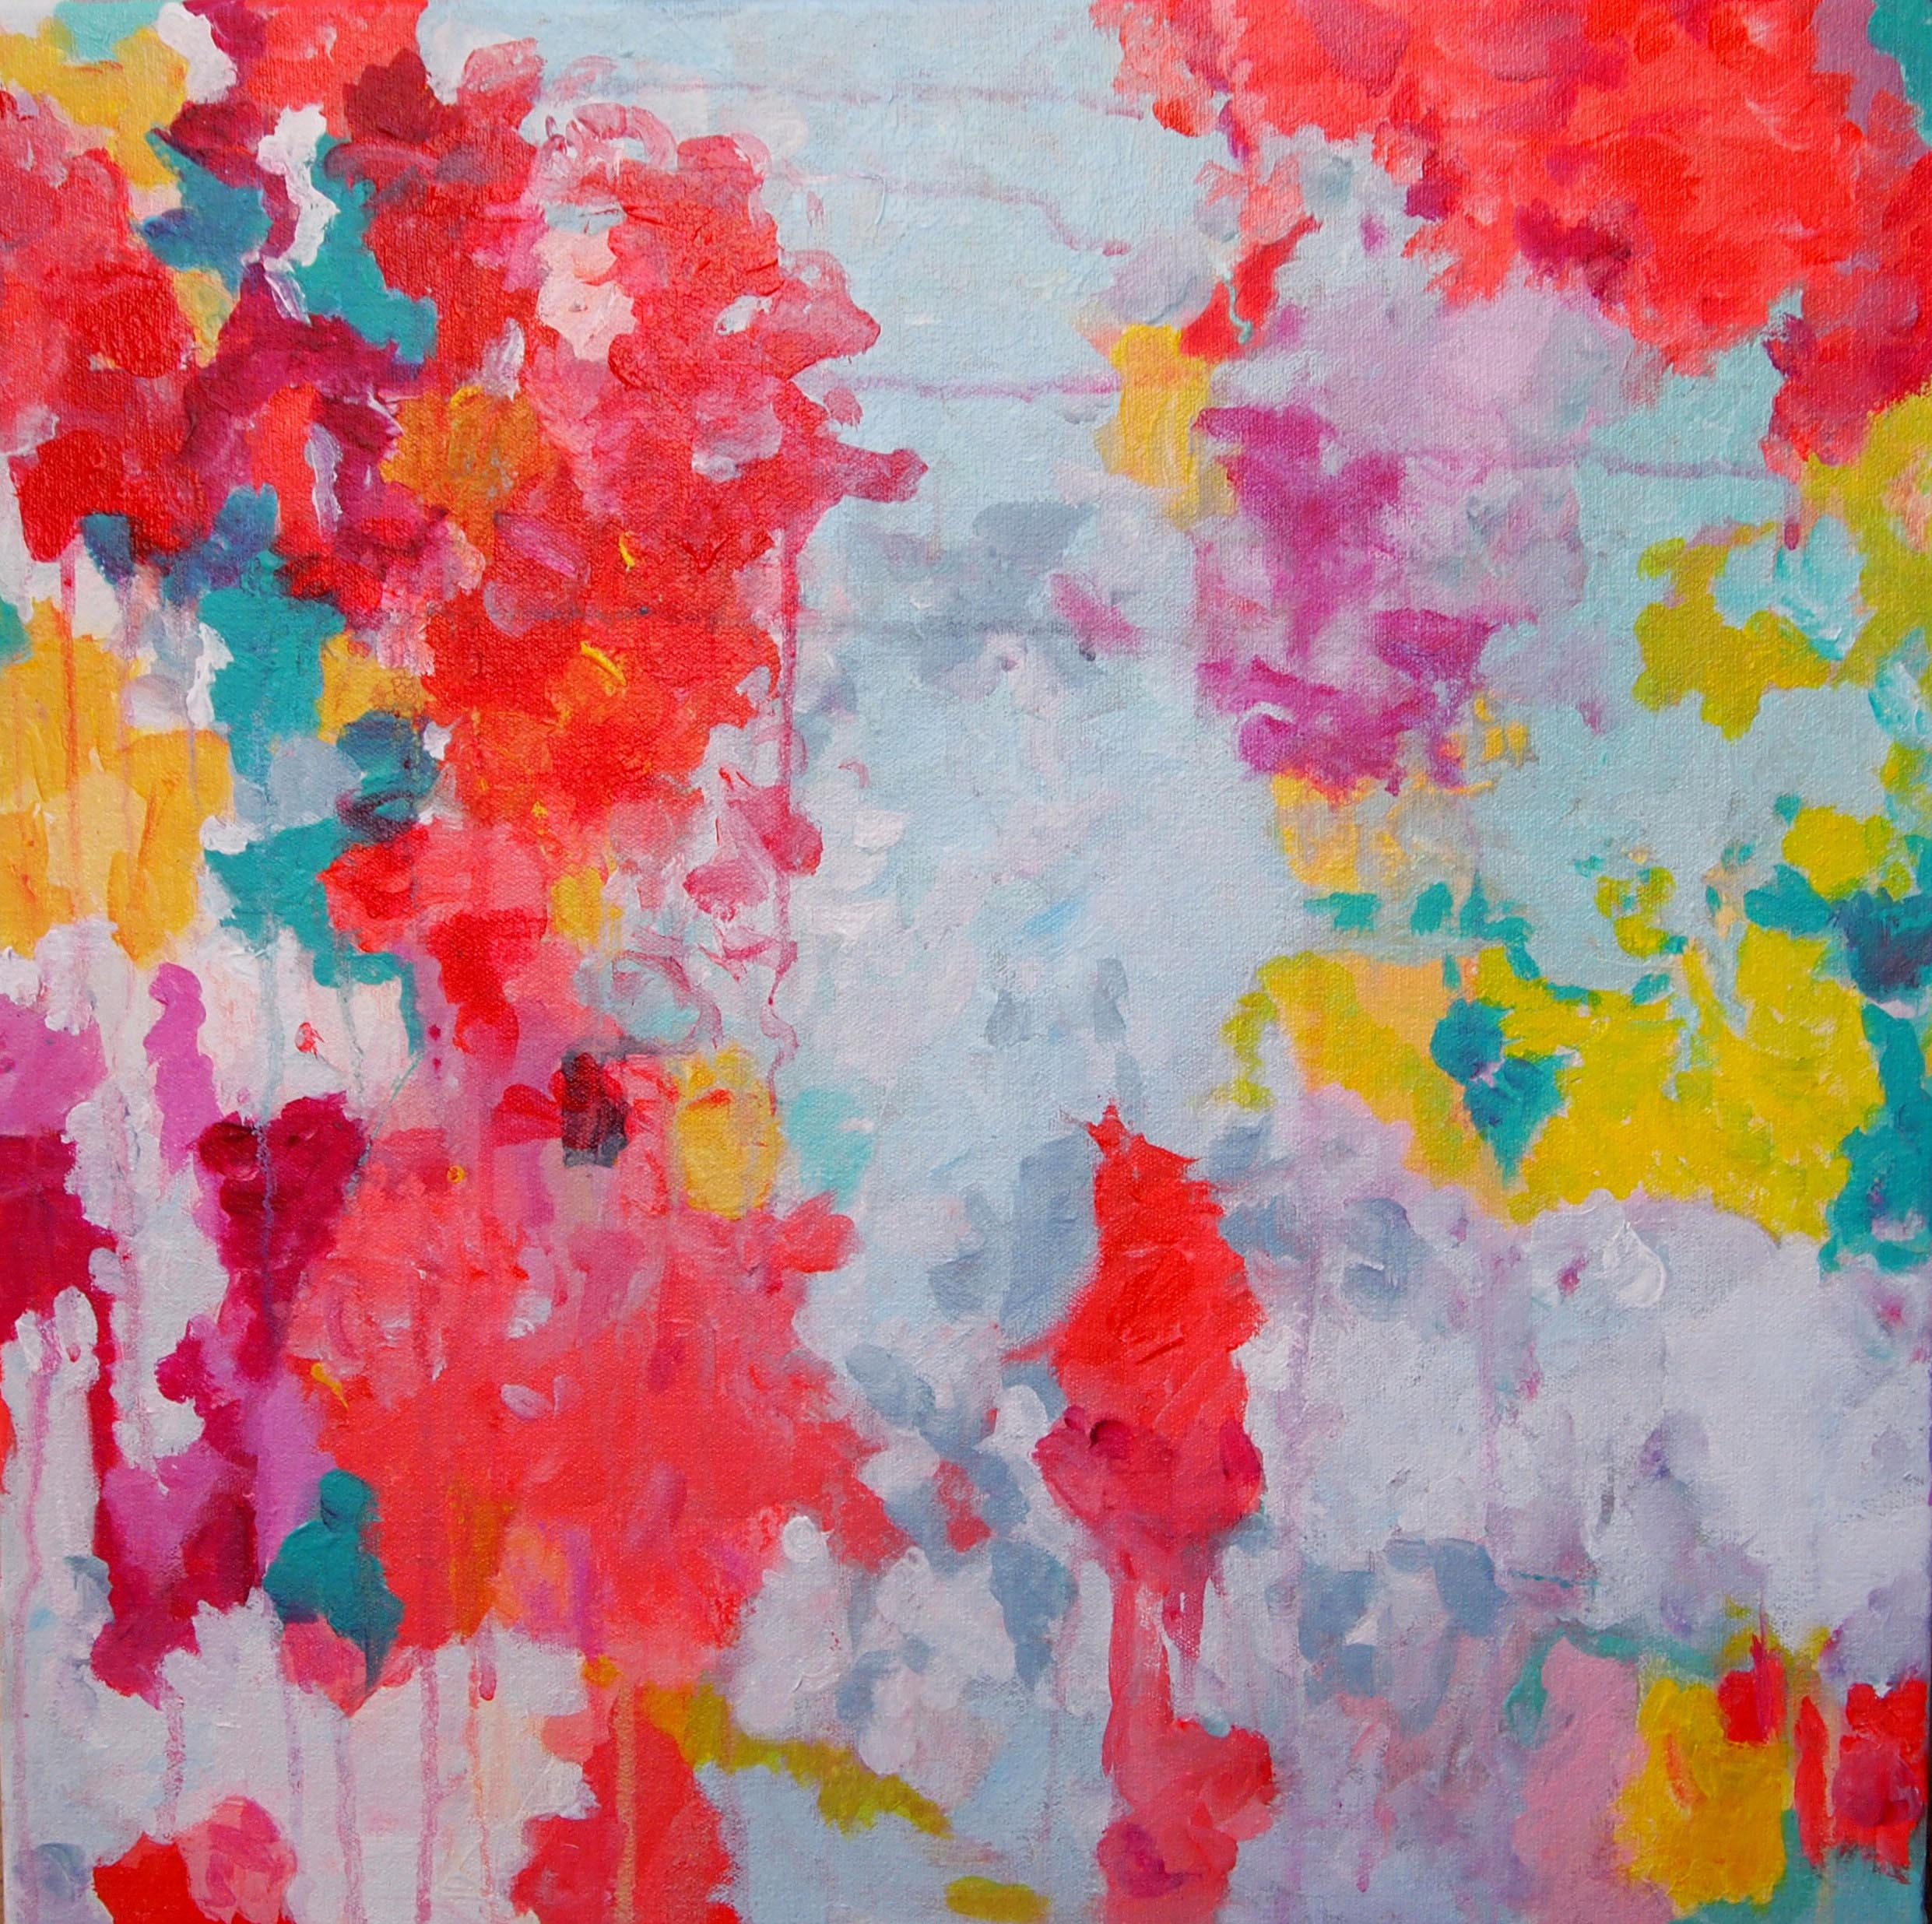 Featured: Whitney Orr, Painter